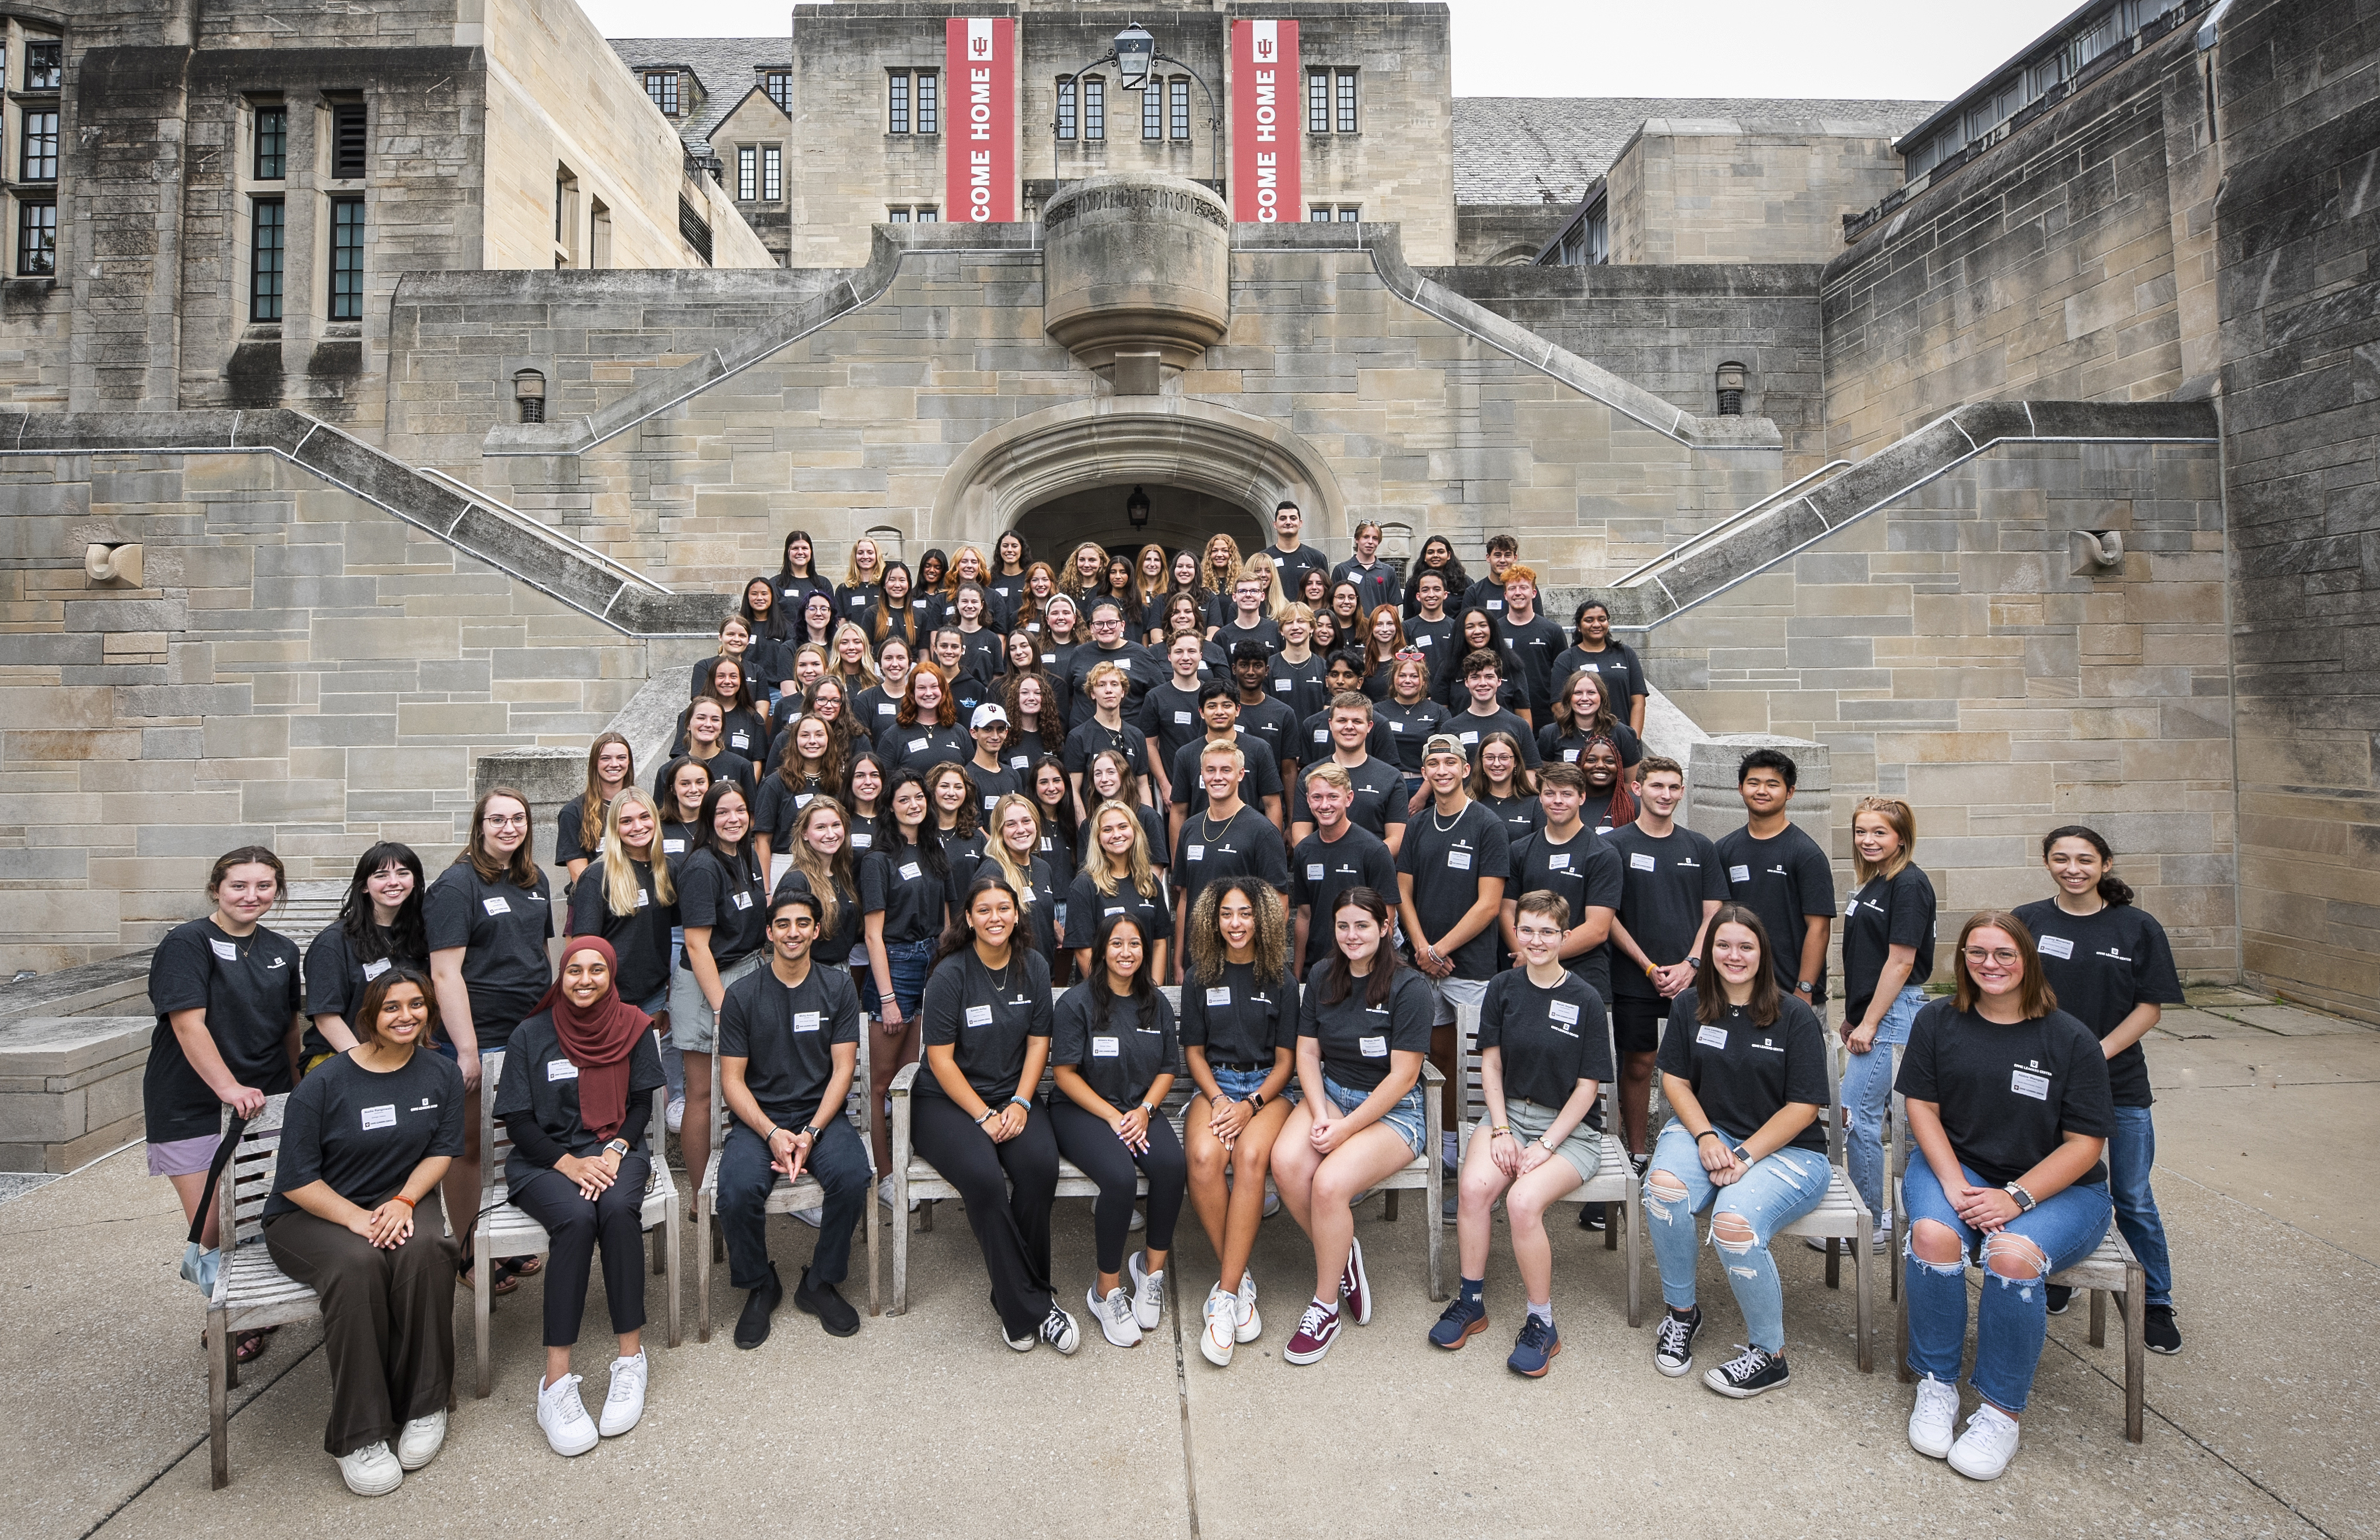 Indiana University Recognized as One of Campus Pride's 2022 Best